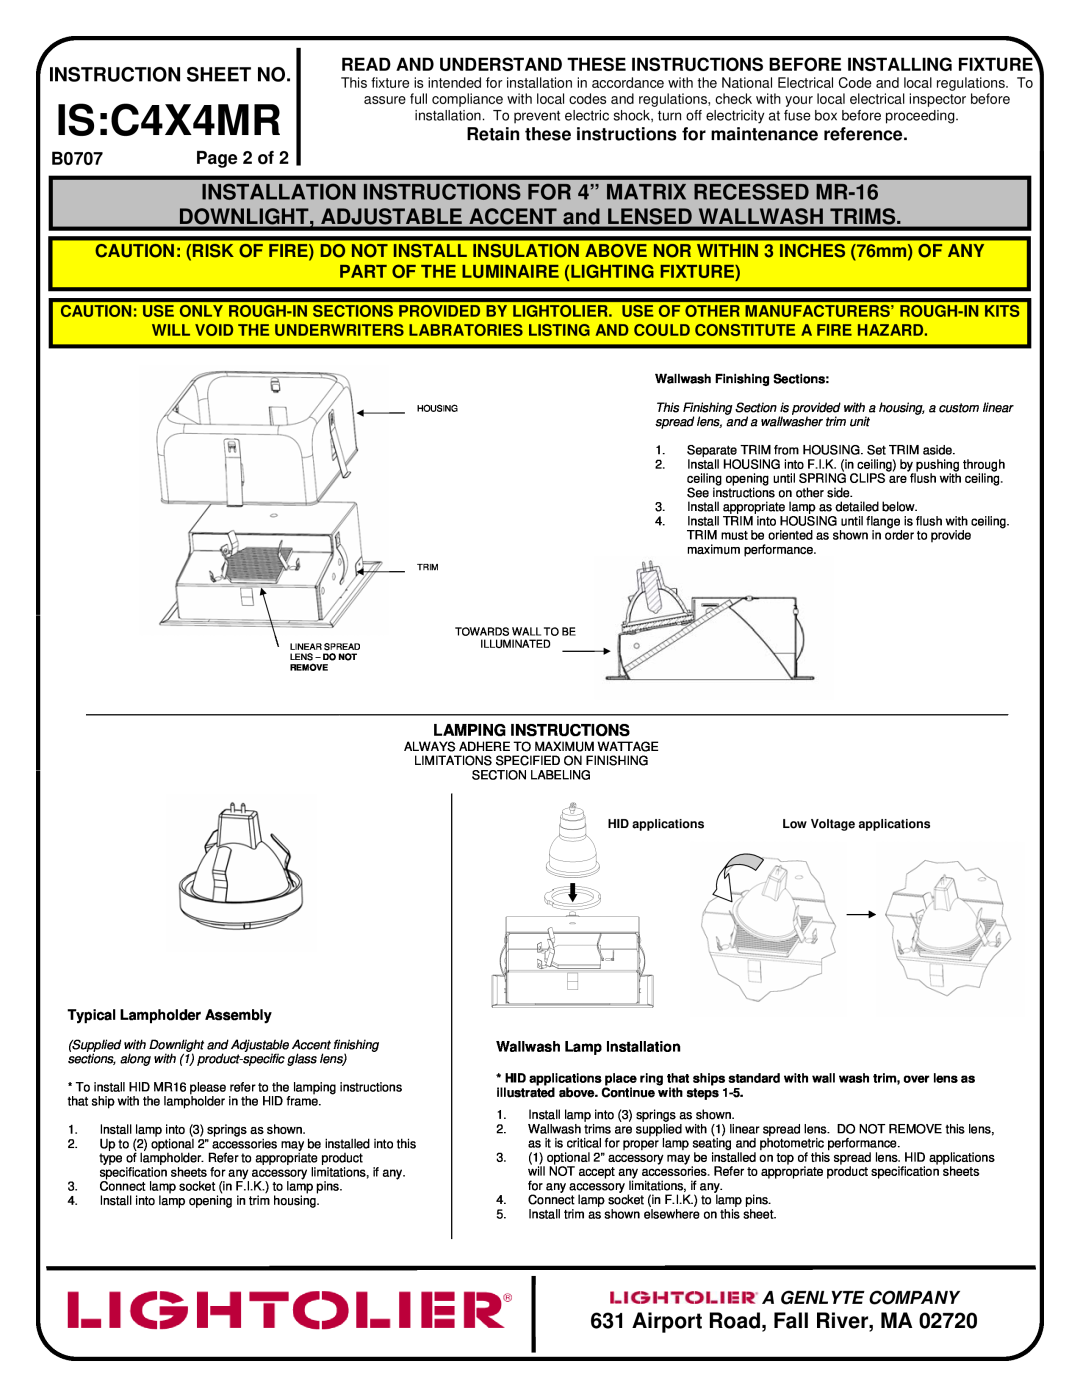 Lightolier Page 2 of, IS C4X4MR, Airport Road, Fall River, MA, Instruction Sheet No, B0707, A Genlyte Company 